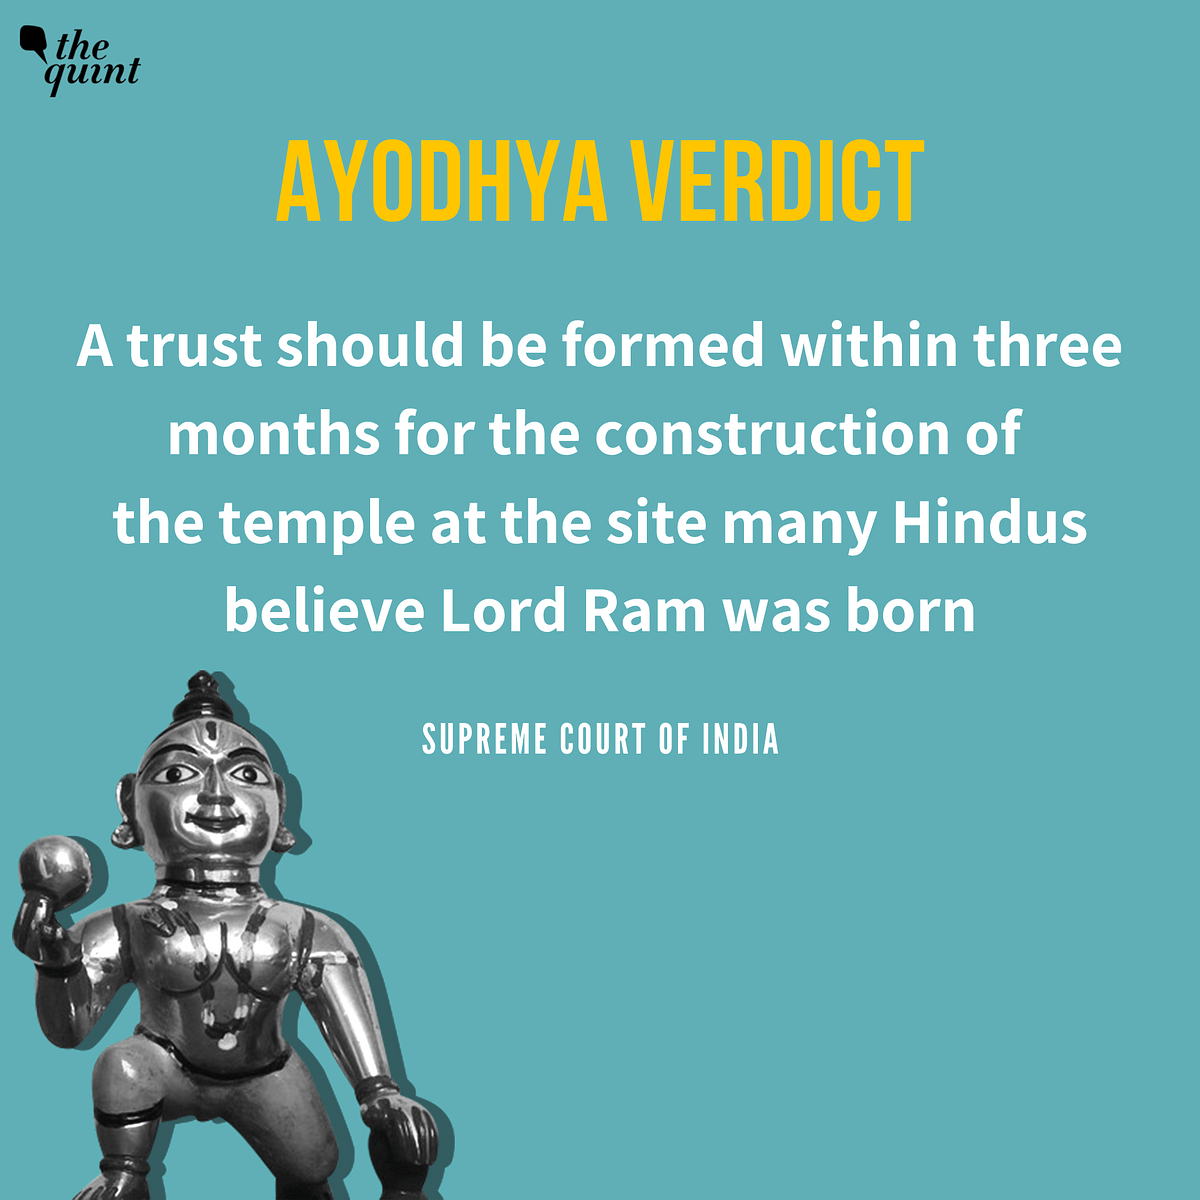  Here are the key highlights of the historic Supreme Court judgement on the Ayodhya land dispute. 